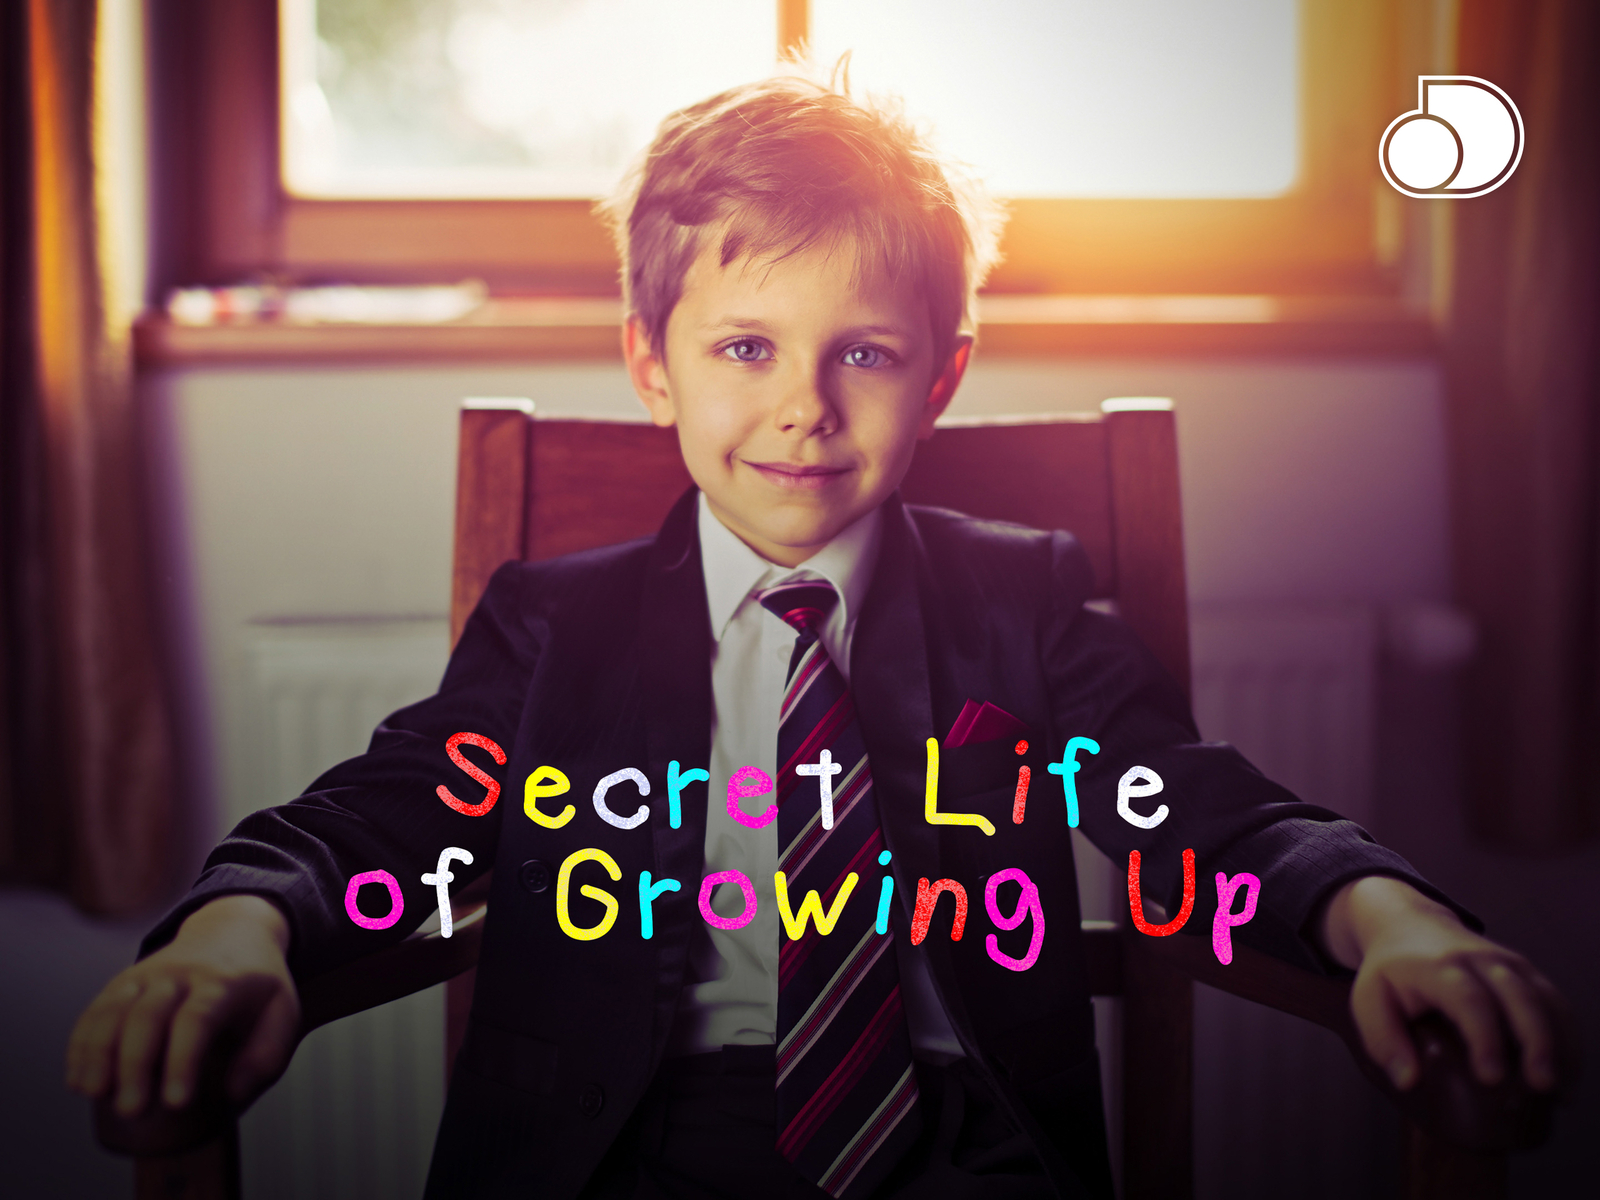 The Secret Life of Growing Up